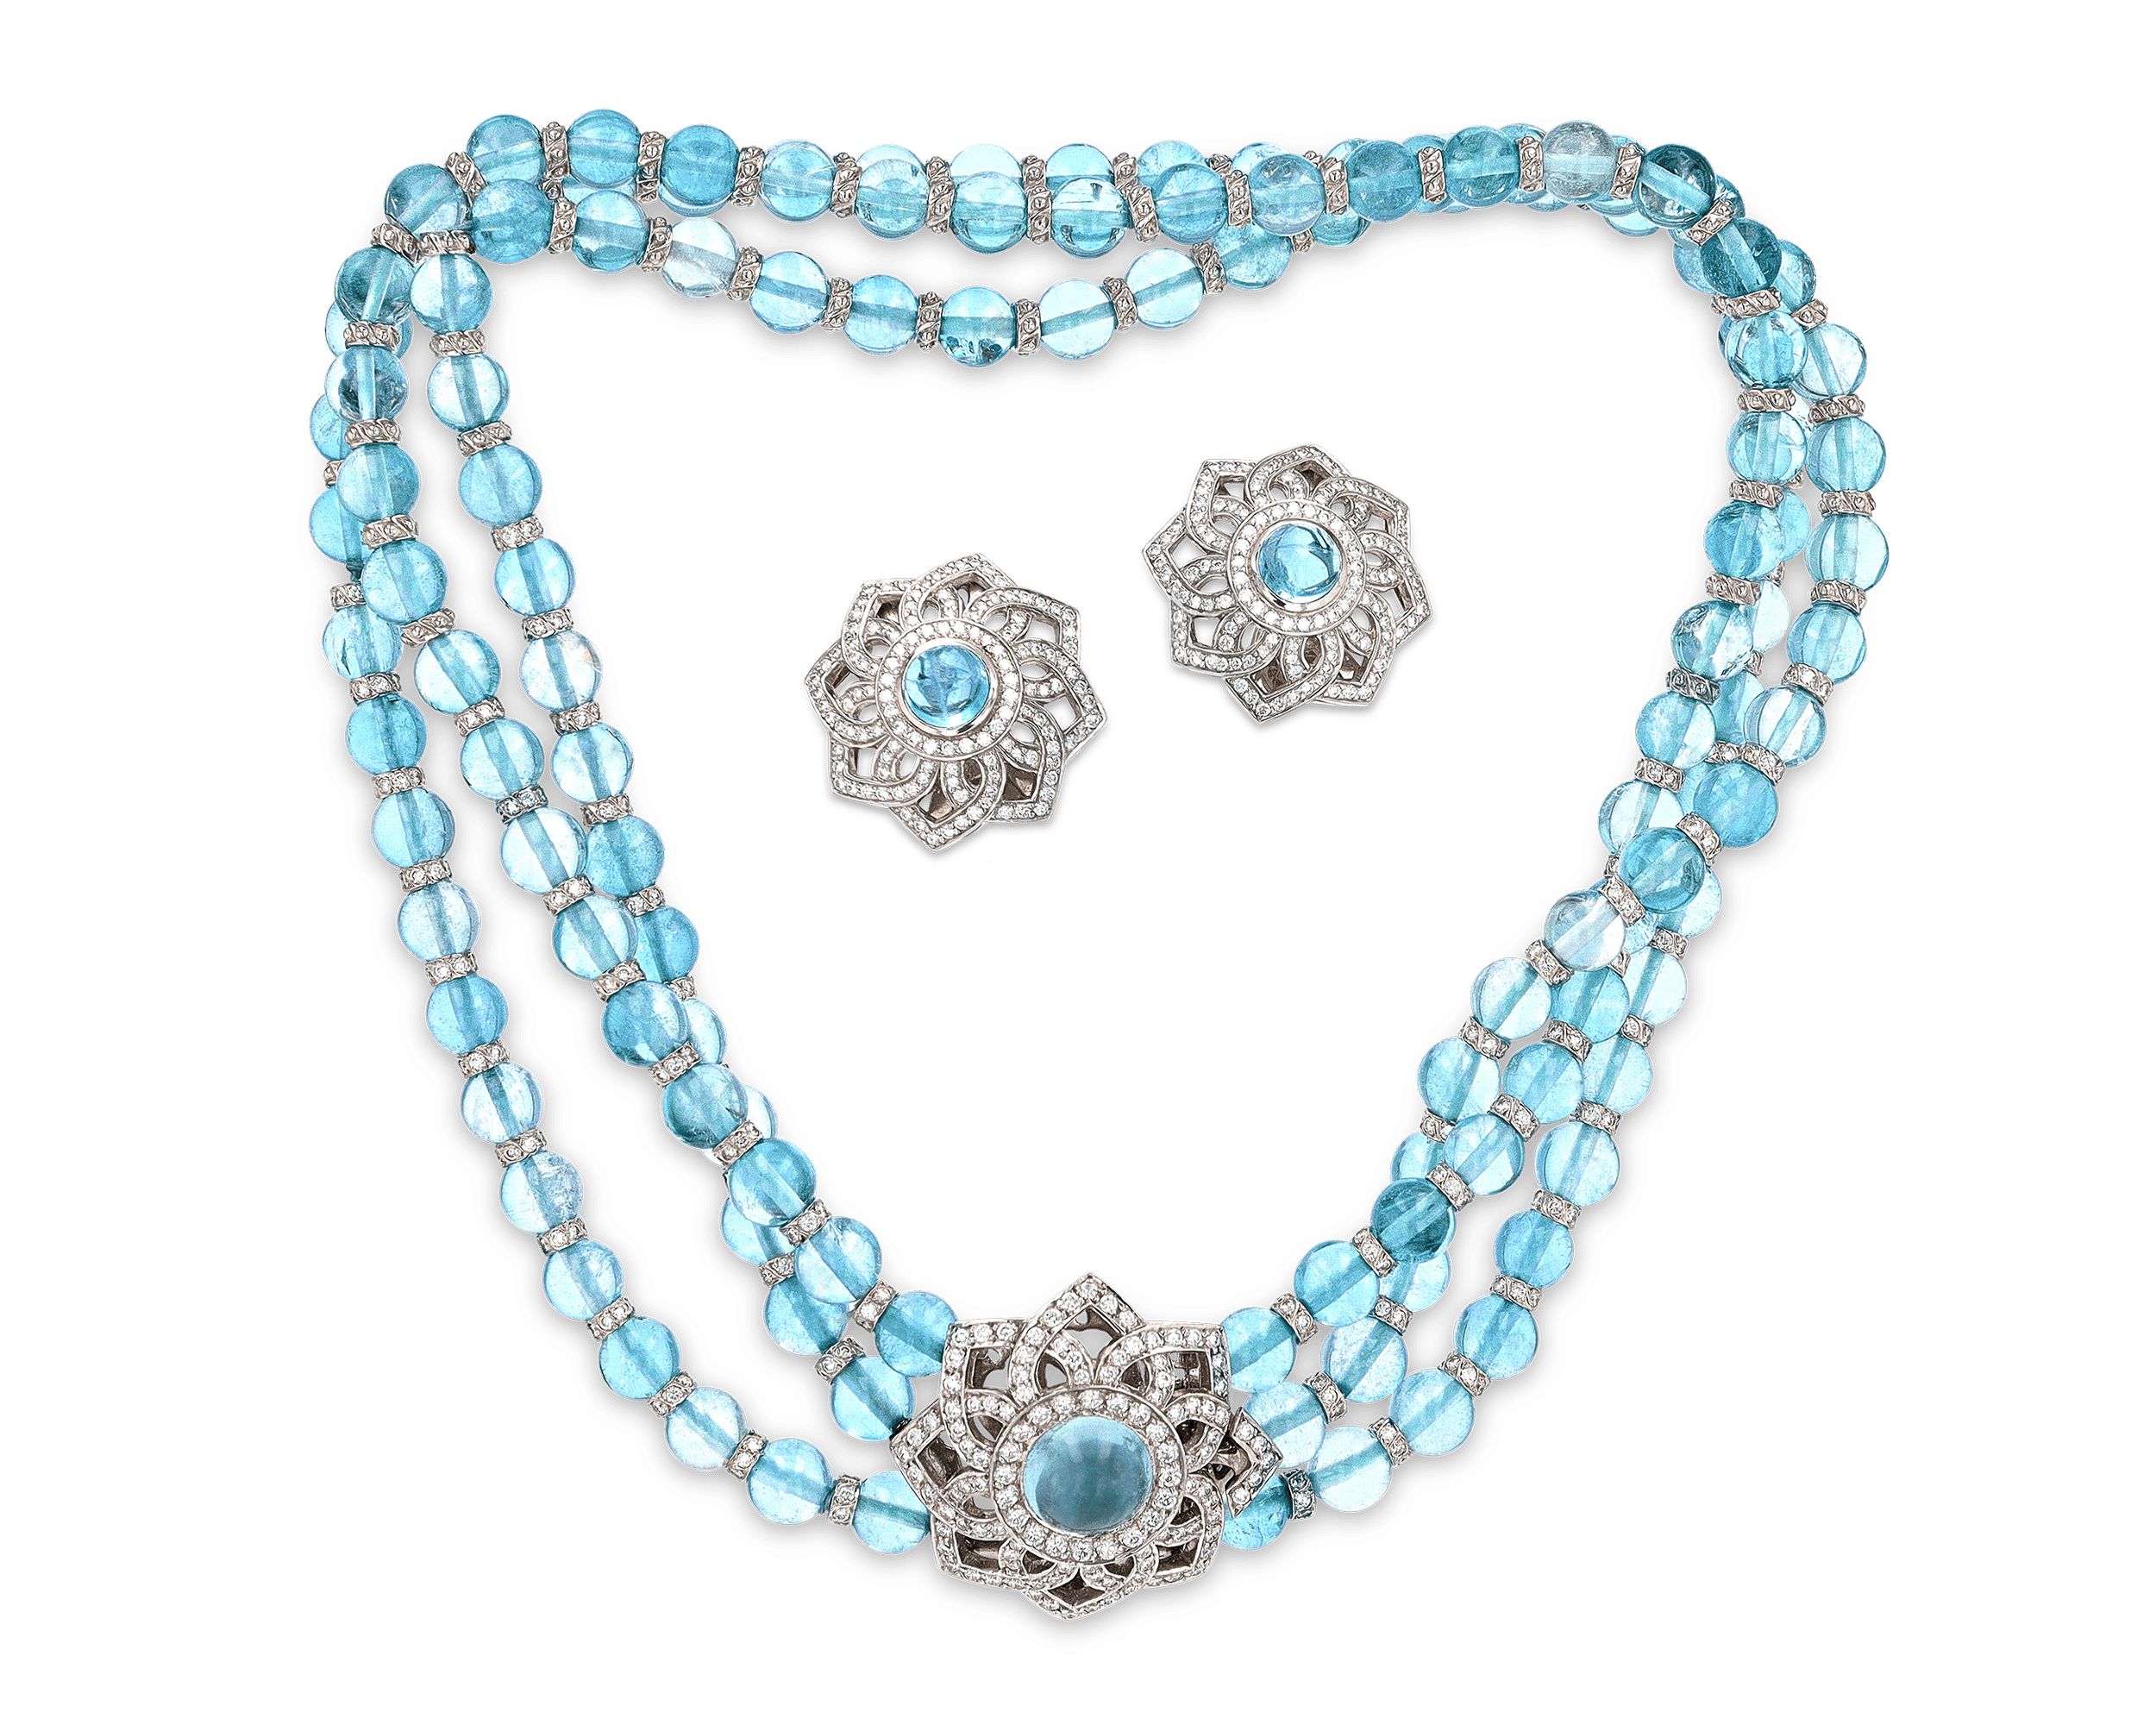 Buy 14K White Gold Oval Aquamarine and Diamond Pendant-Necklace on an 18  inch Chain at Amazon.in